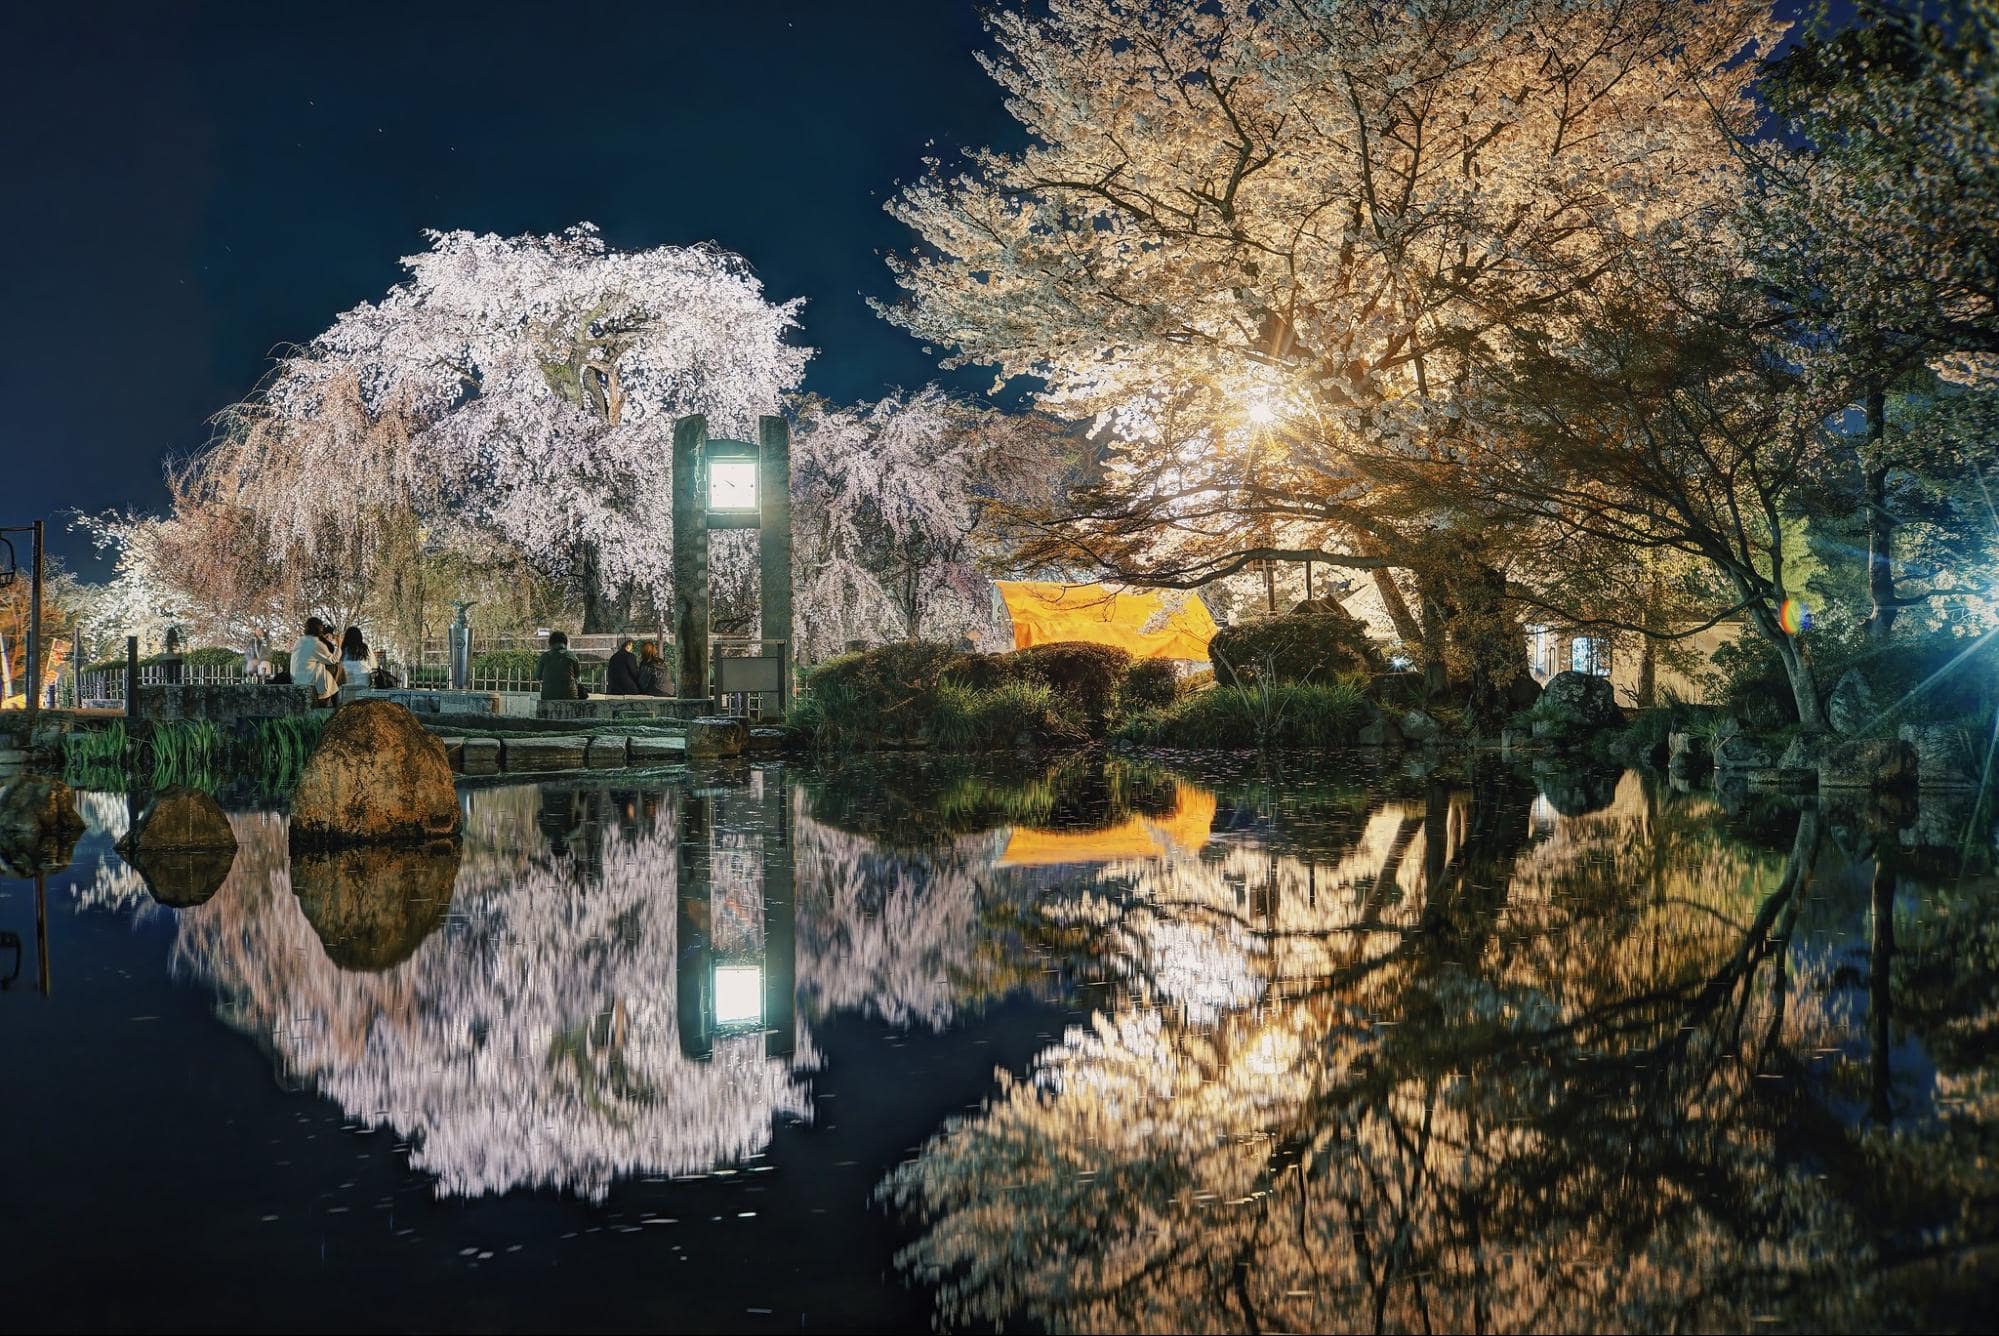 Cherry Blossoms in Japan - Maruyama Park at night